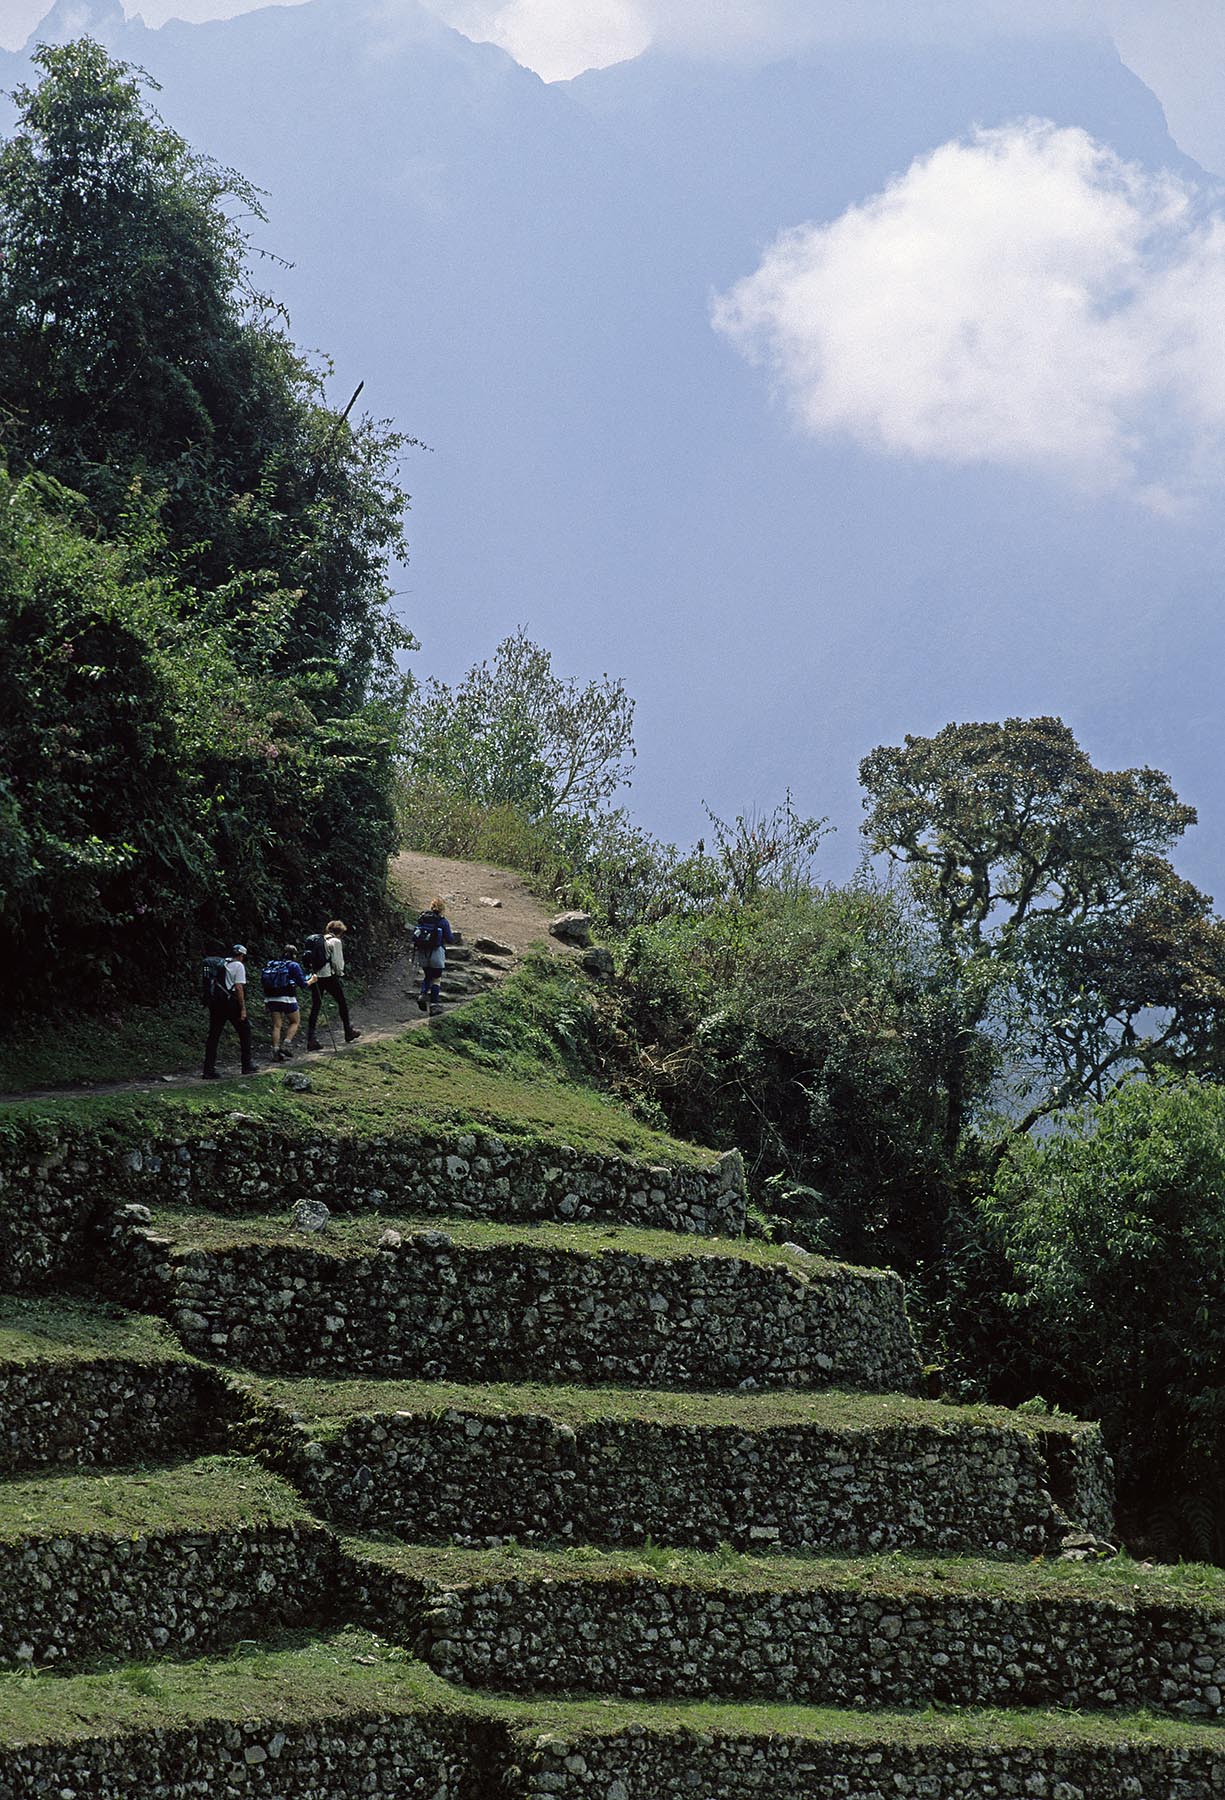 The beautifully constructed STONE TERRACES of WINAY WAYNA (forever young) & the INCA TRAIL - PERUVIAN ANDES